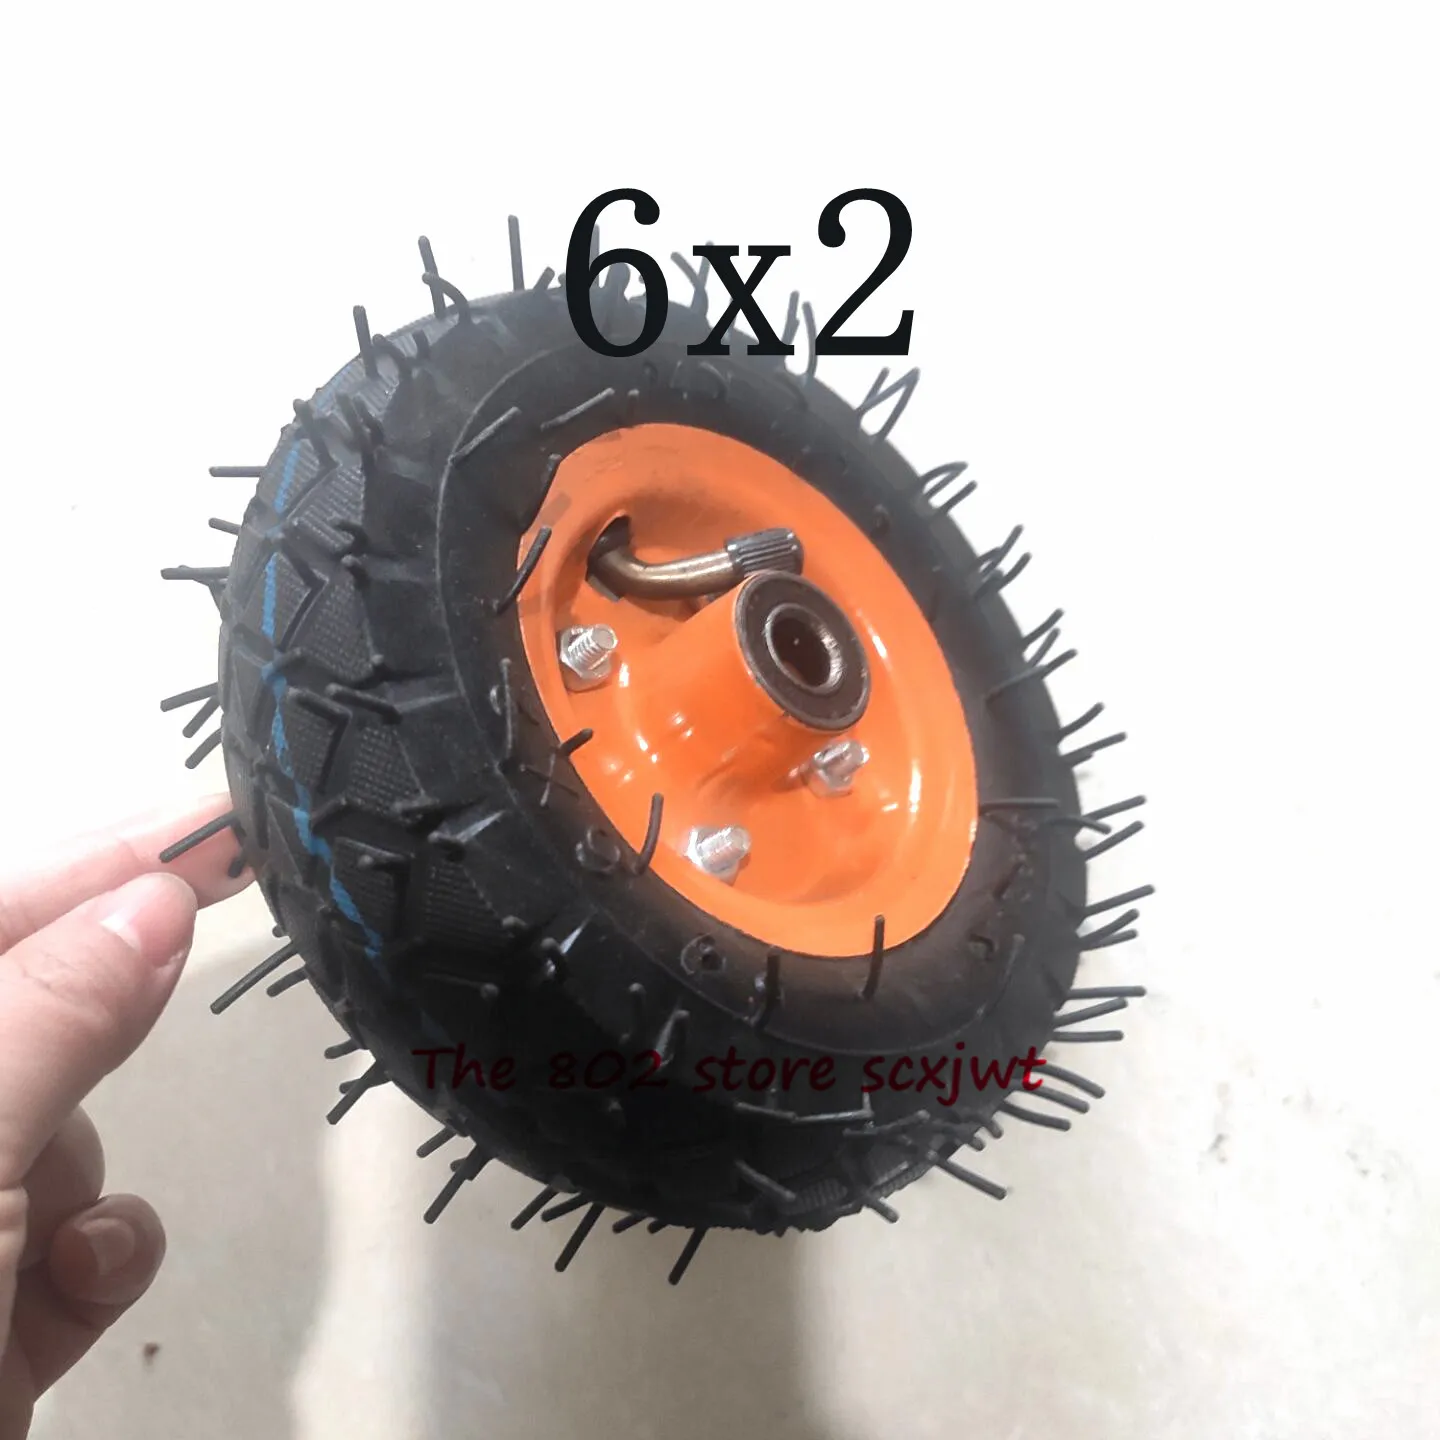 

Size 6x2 Tyre with Rim 6 Inch 6*2 Pneumatic Wheel Tire Pump Trolley Cart Wheel Roller Caster Wheel Caster